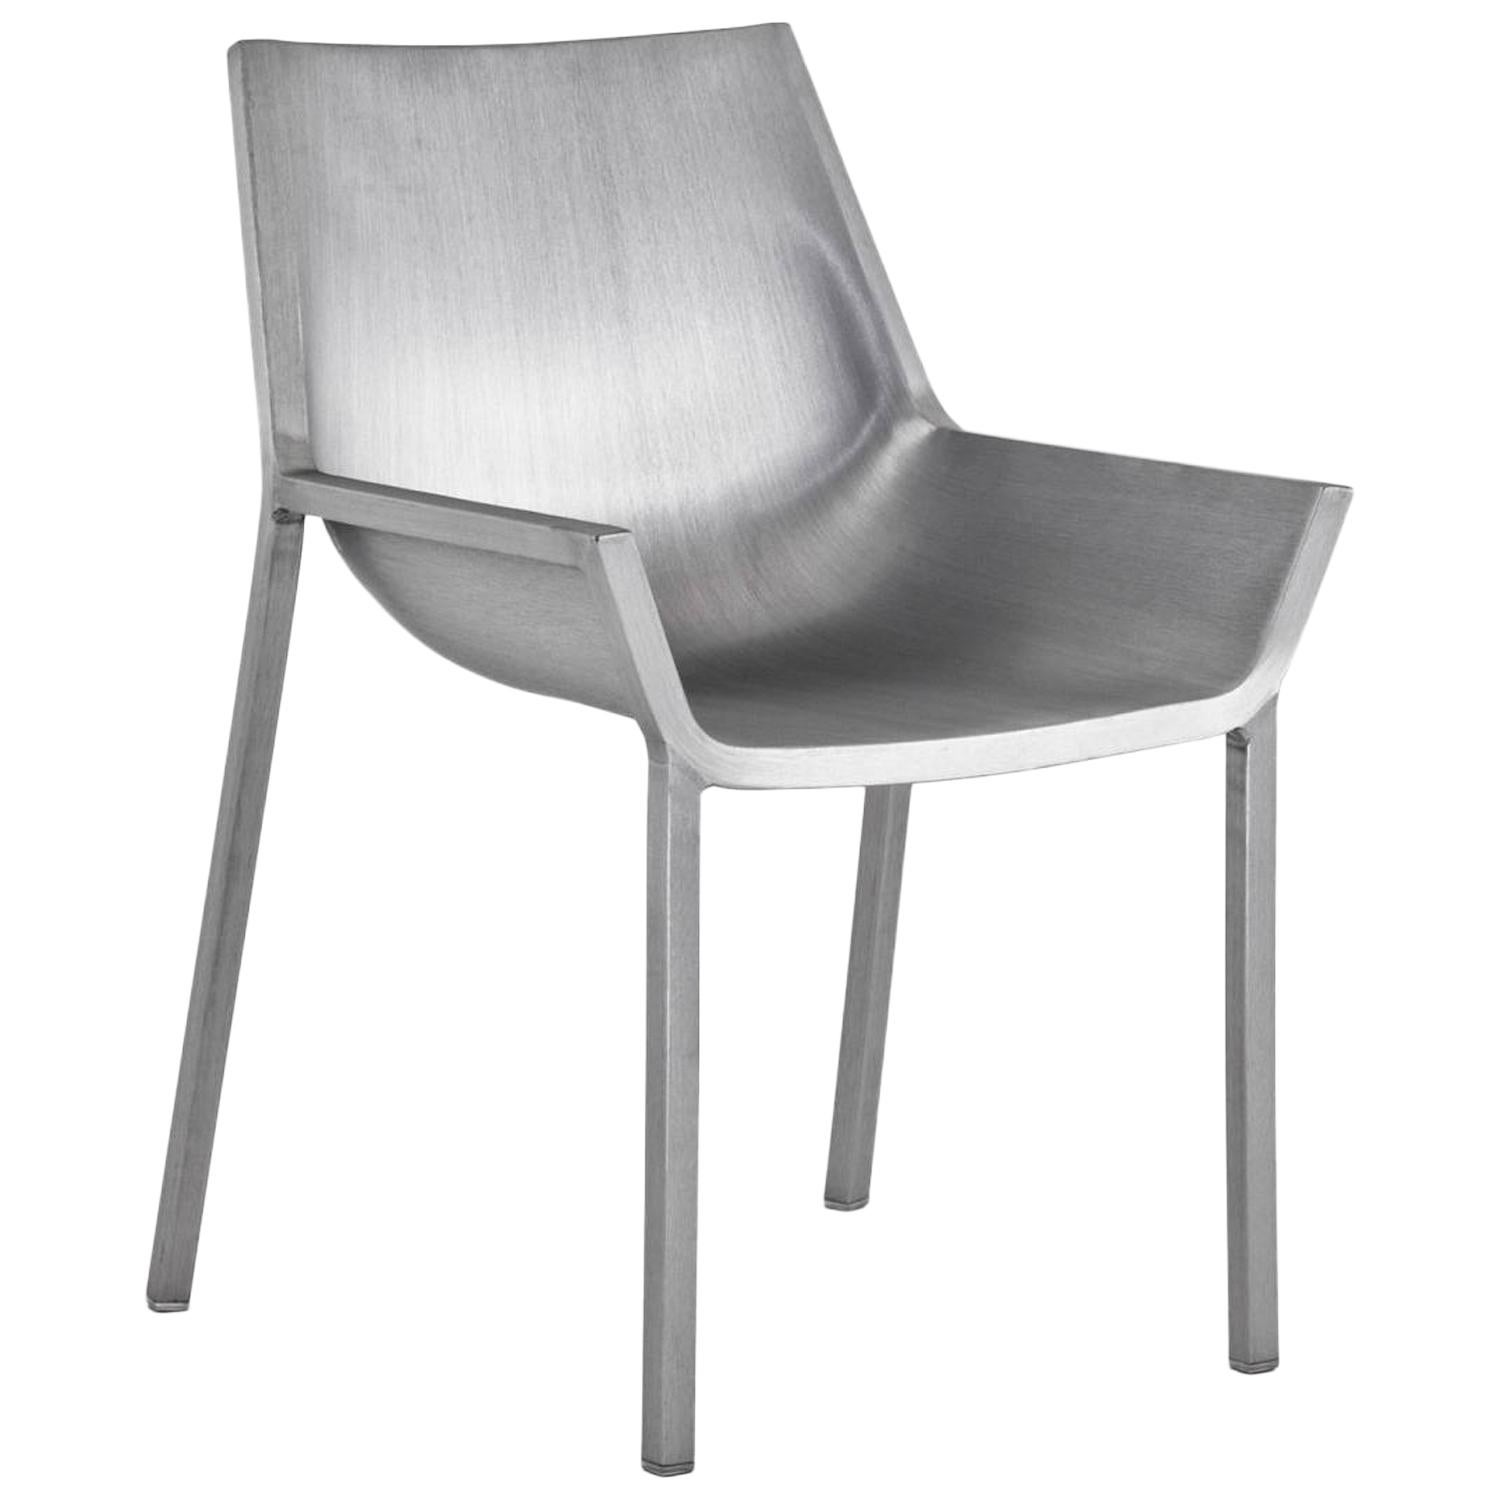 Emeco Sezz Side Chair in Brushed Aluminum by Christophe Pillet 